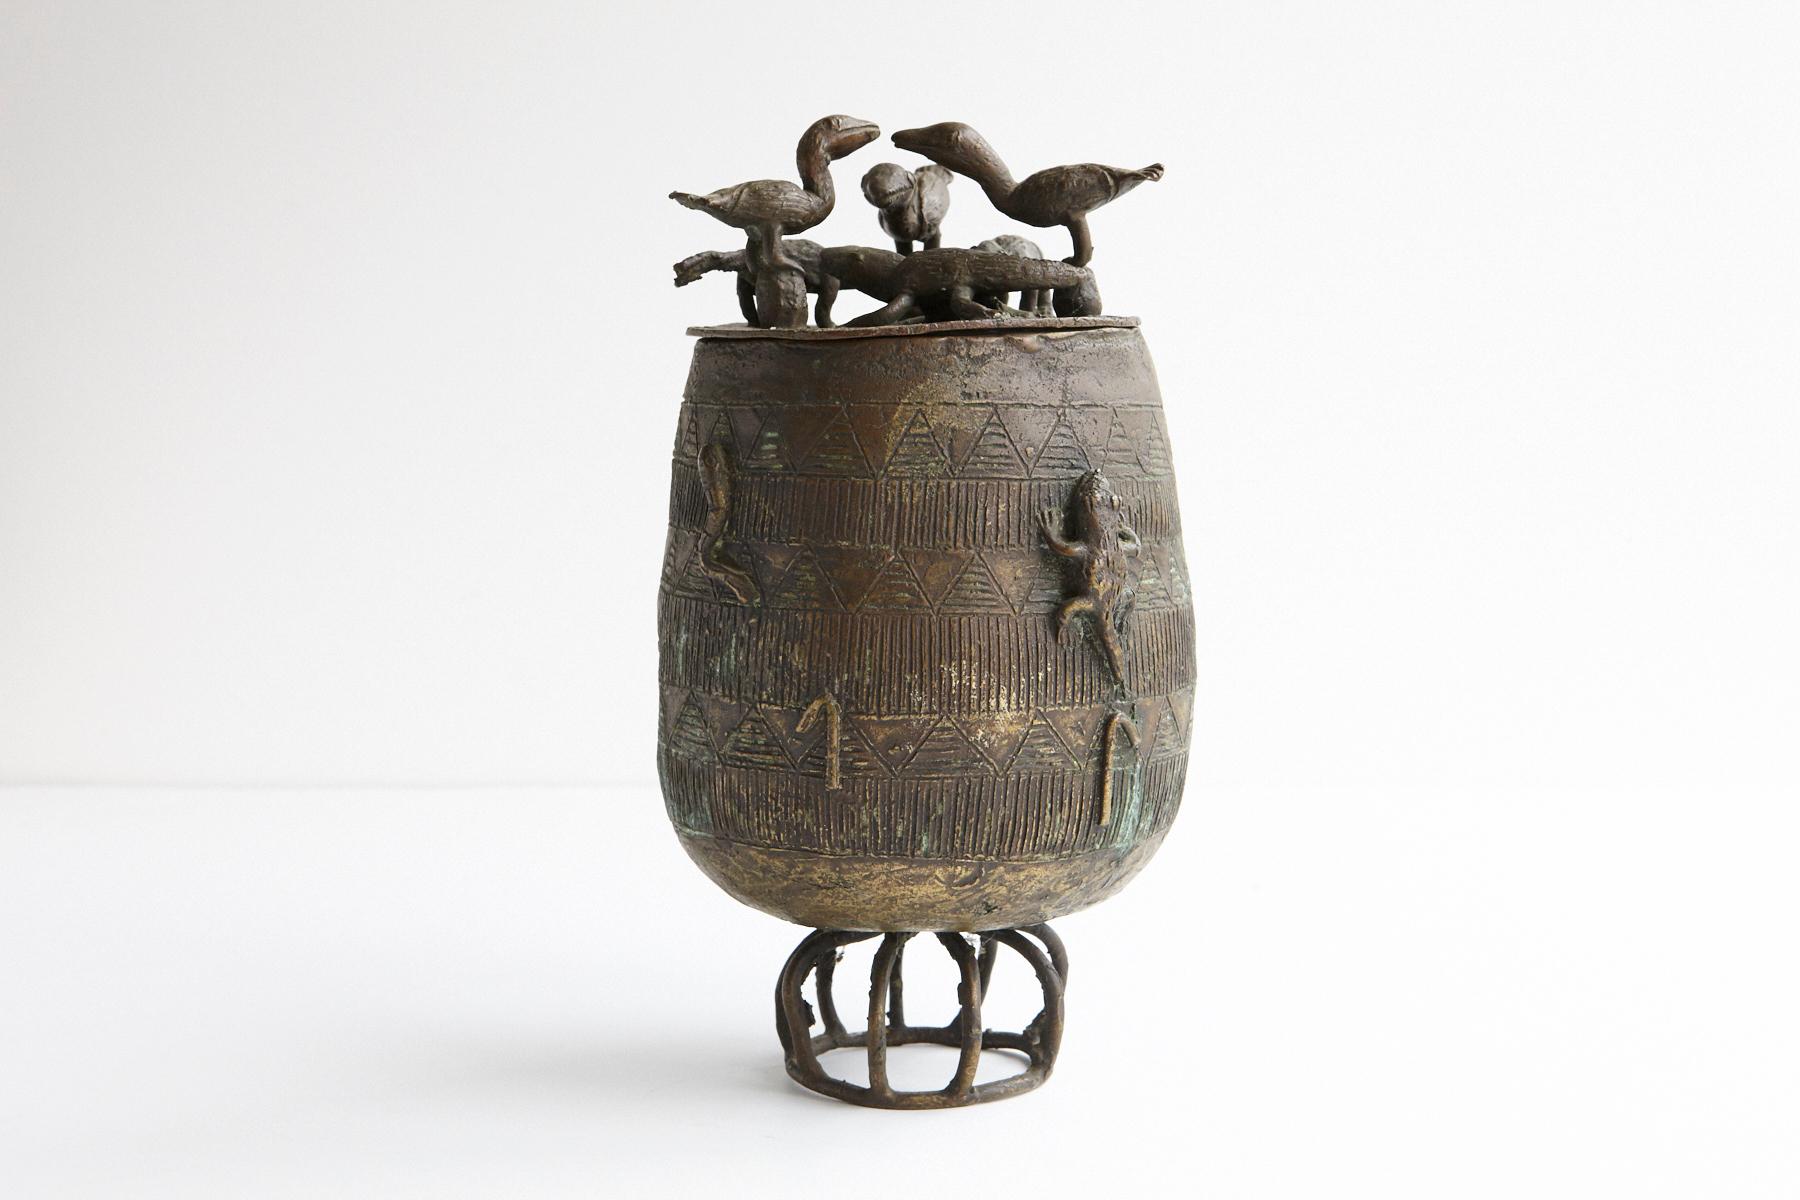 A beautiful bronze vessel, lidded ovoid pot on a circular support, made by the Asante People, Ghana. Nicely cast lid with 7 figures in the form of animals and reptiles are depicted on the side of the vessel crawling up the edge.
The so-called 